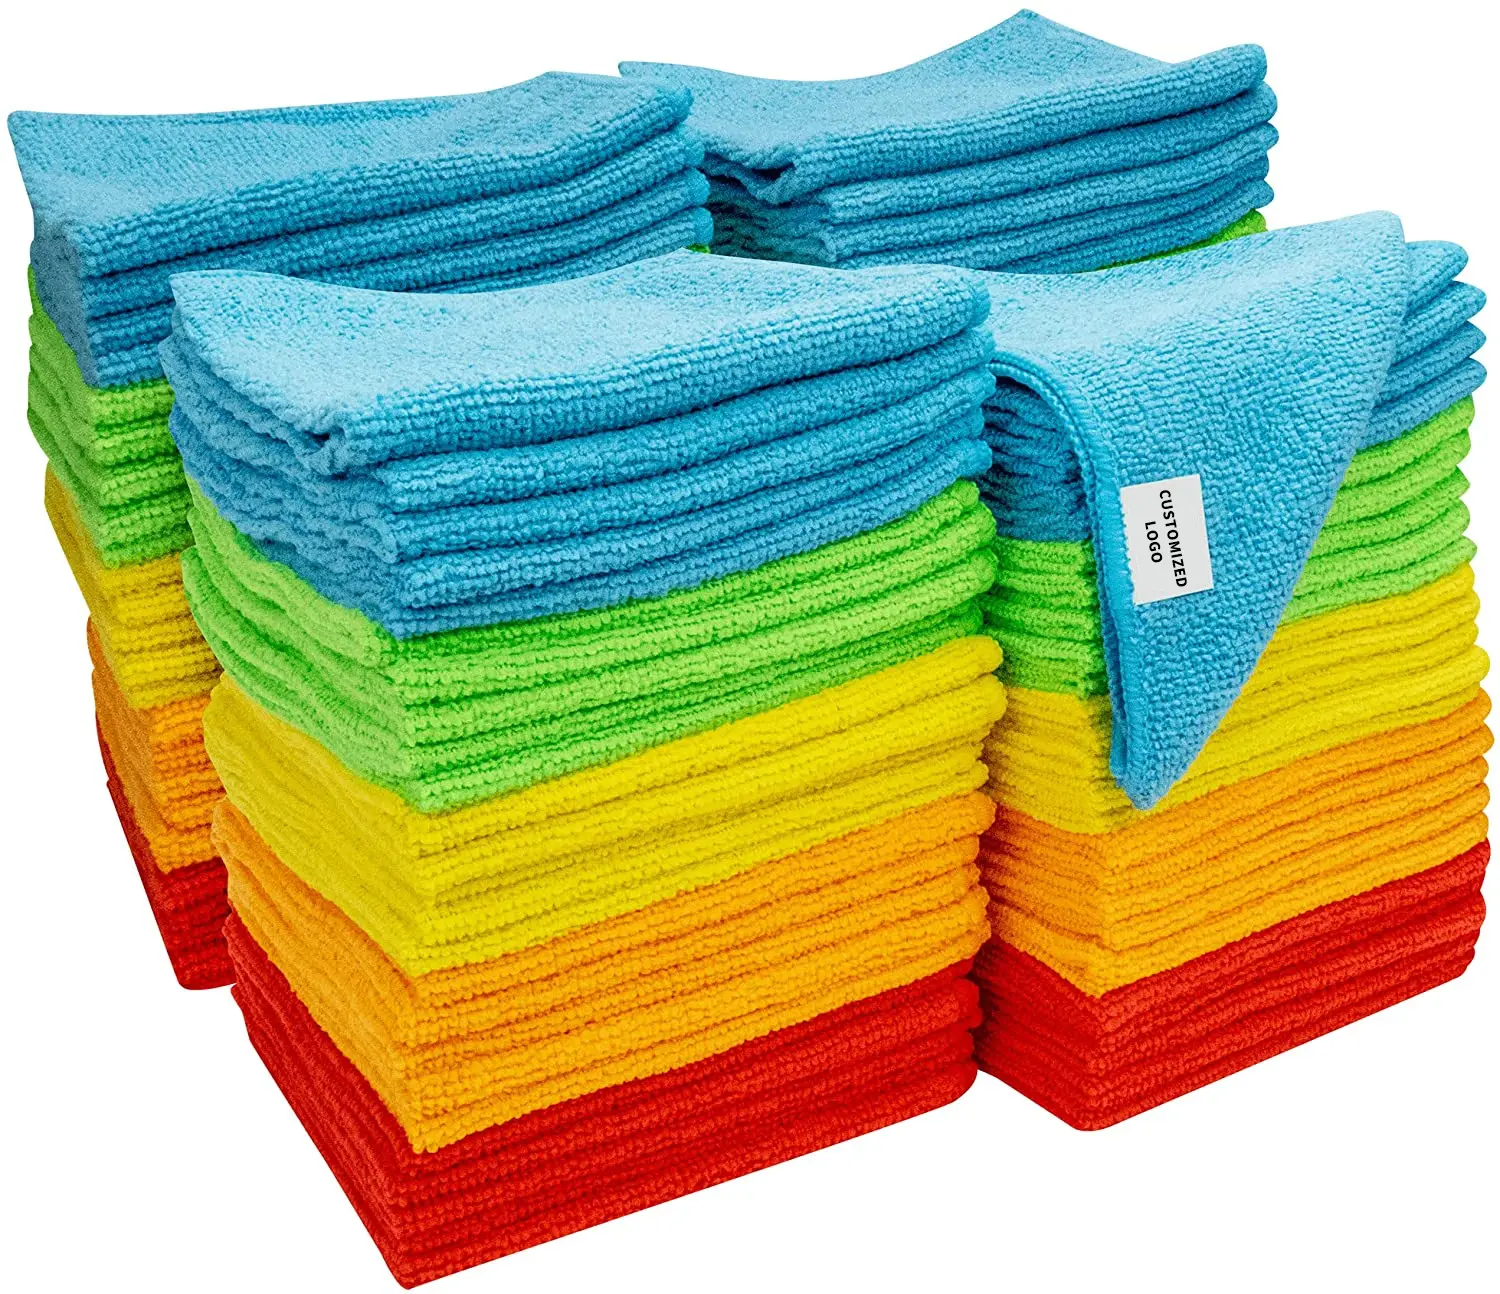 Manufacturer supply Quality Super Absorbent Kitchen Dish Cloths Multi Purpose Quick Dry Equipment Cleaning Microfiber Towel